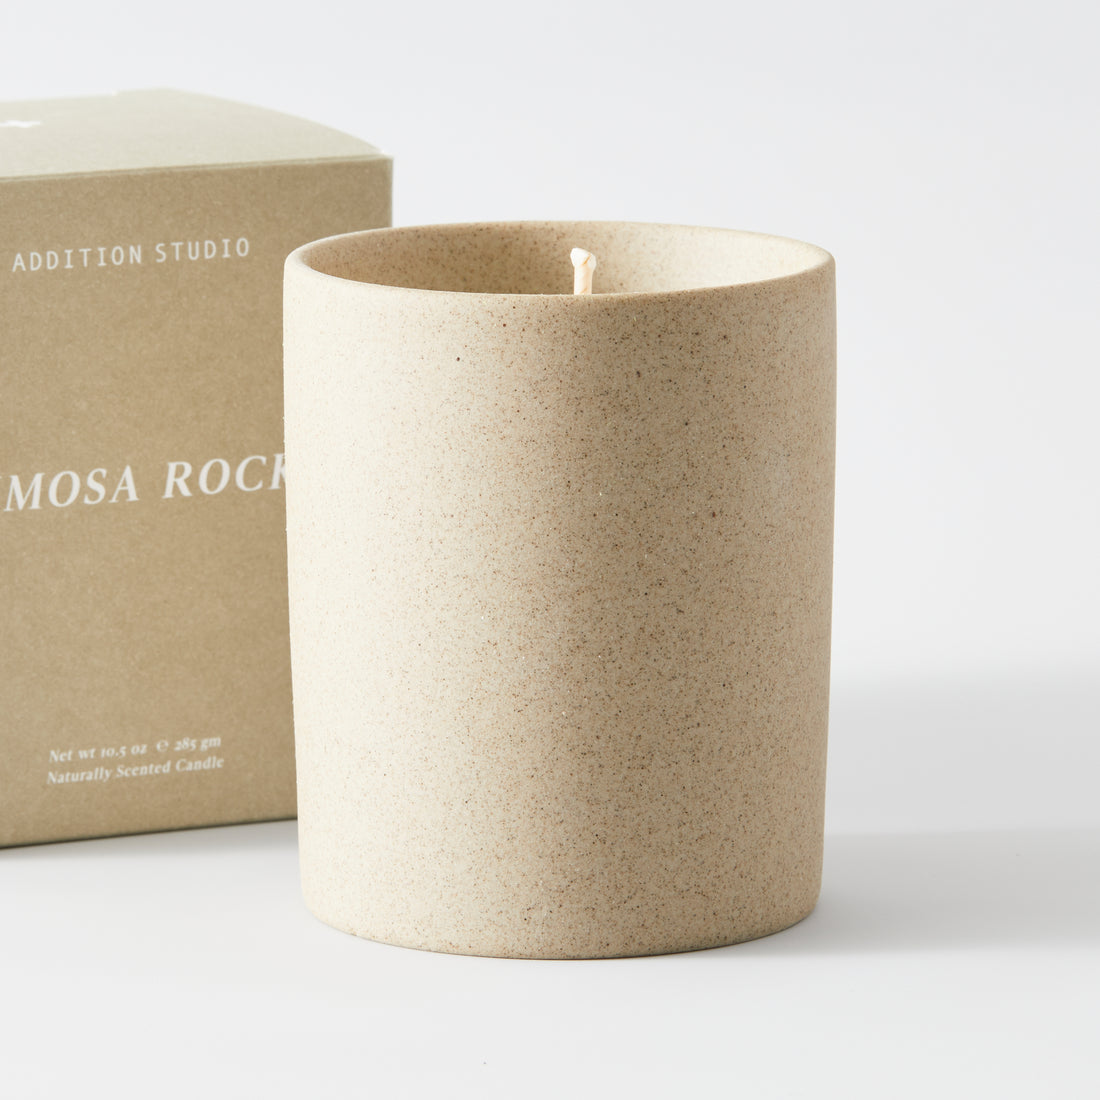 Addition Studio Scented Candle Mimosa Rocks